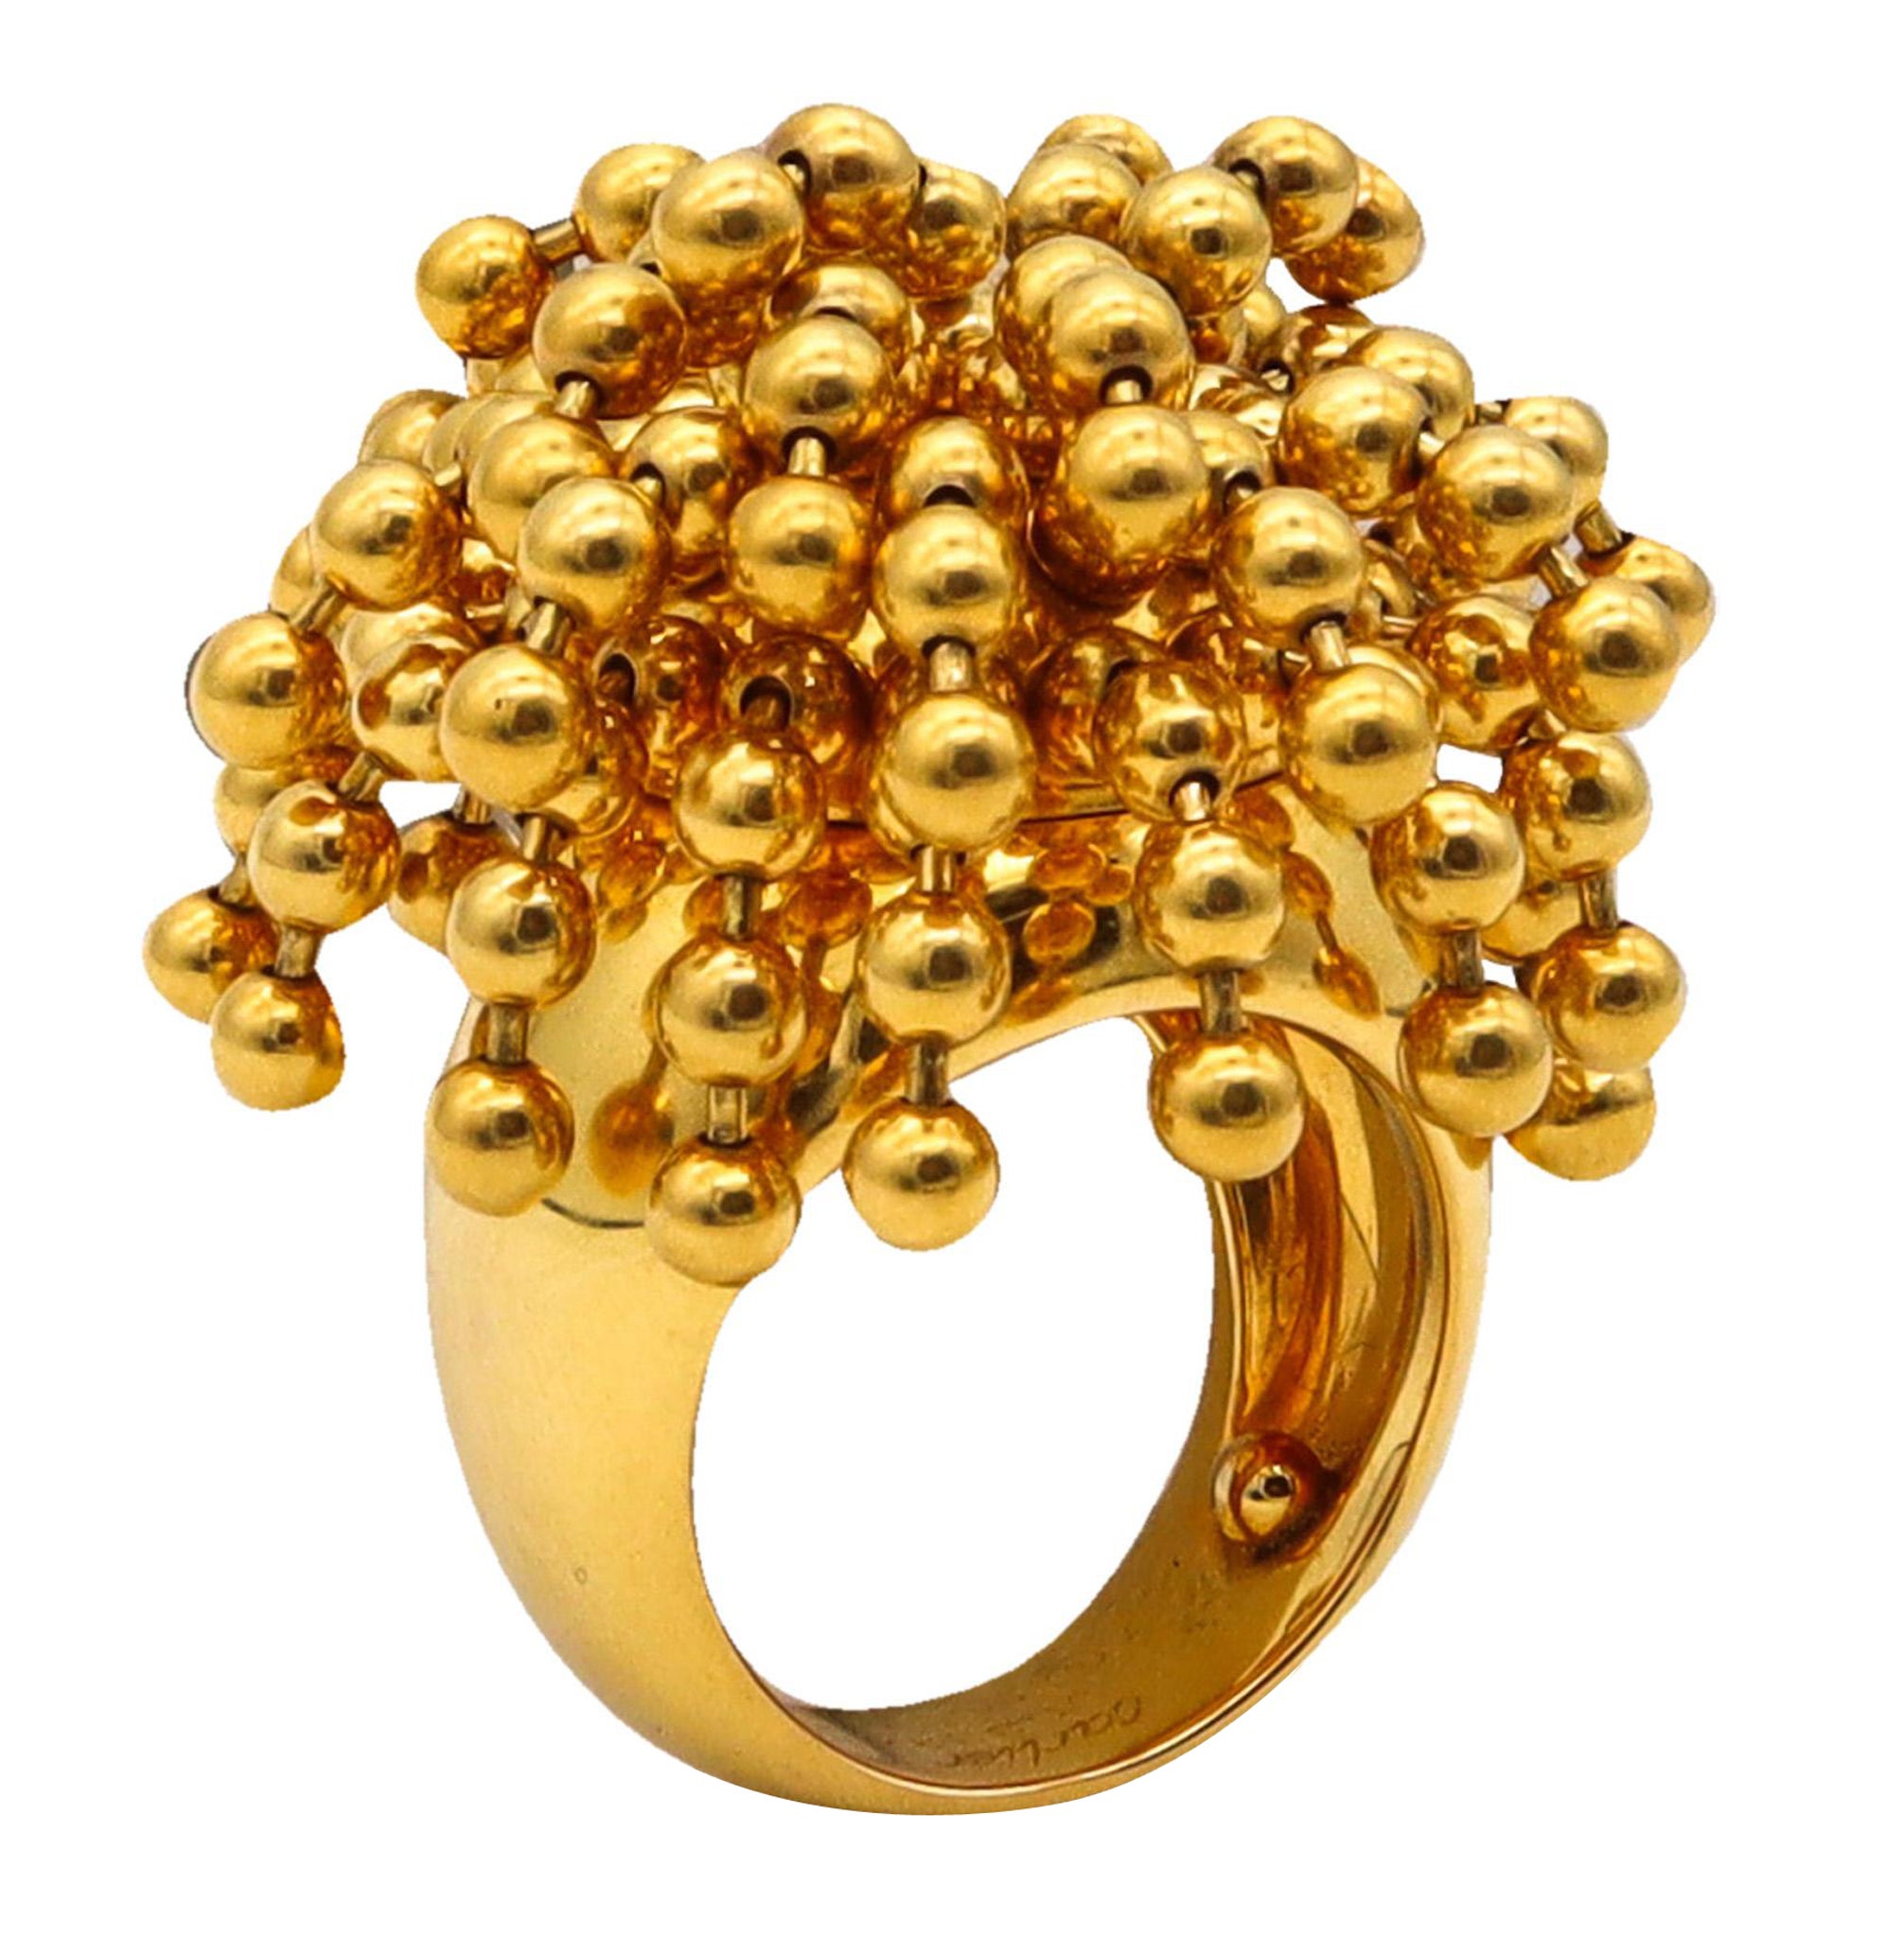 Cartier Nouvelle Bague Pom Pom Kinetic Cocktail Ring in 18 Karat Yellow Gold